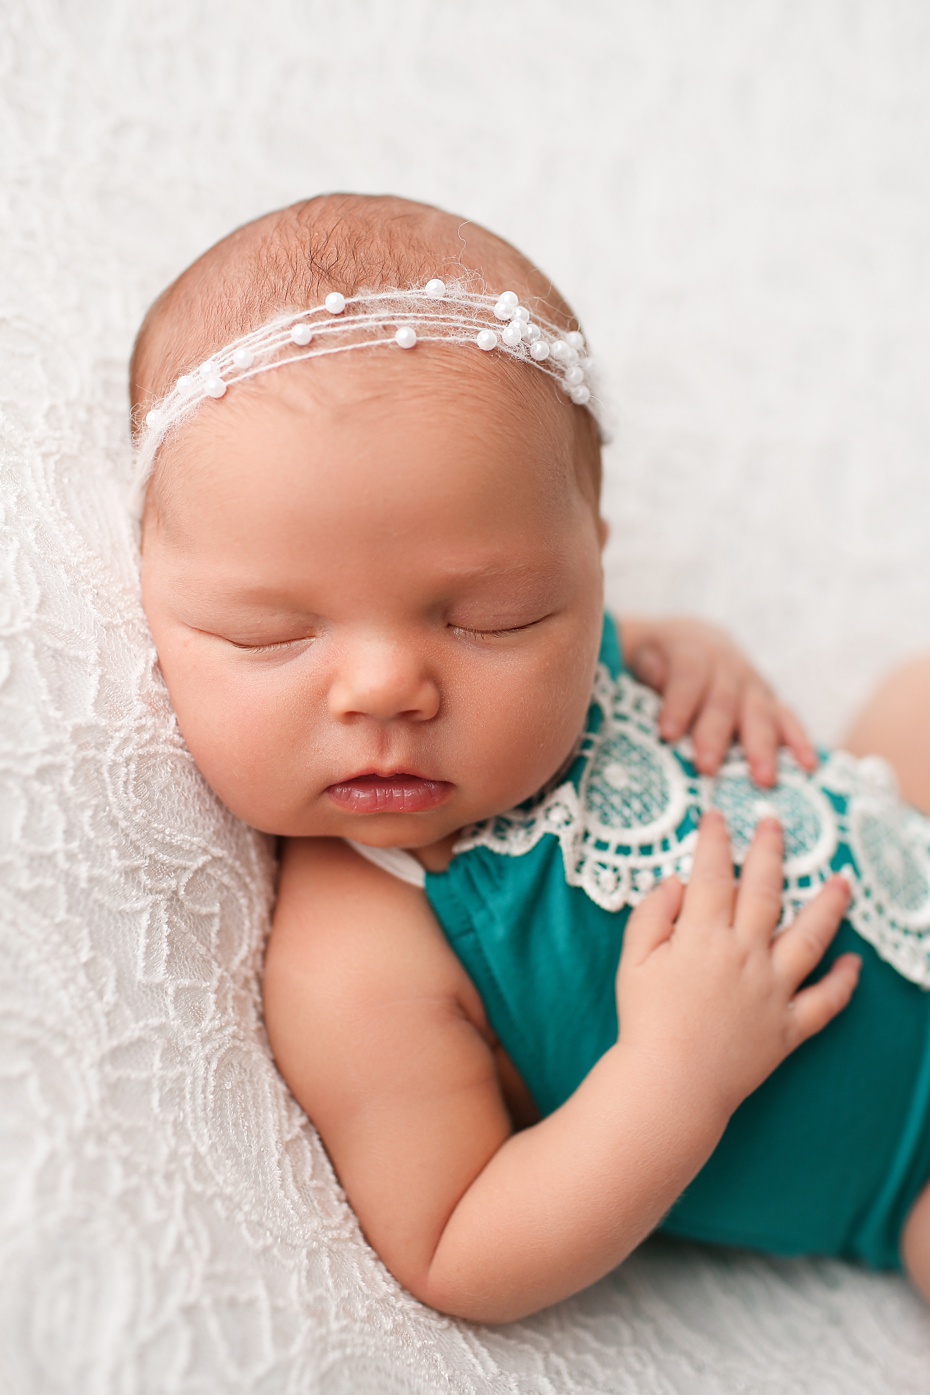 truly_you_photography_blog_baby_newborn_pink_teal-29_web.jpg